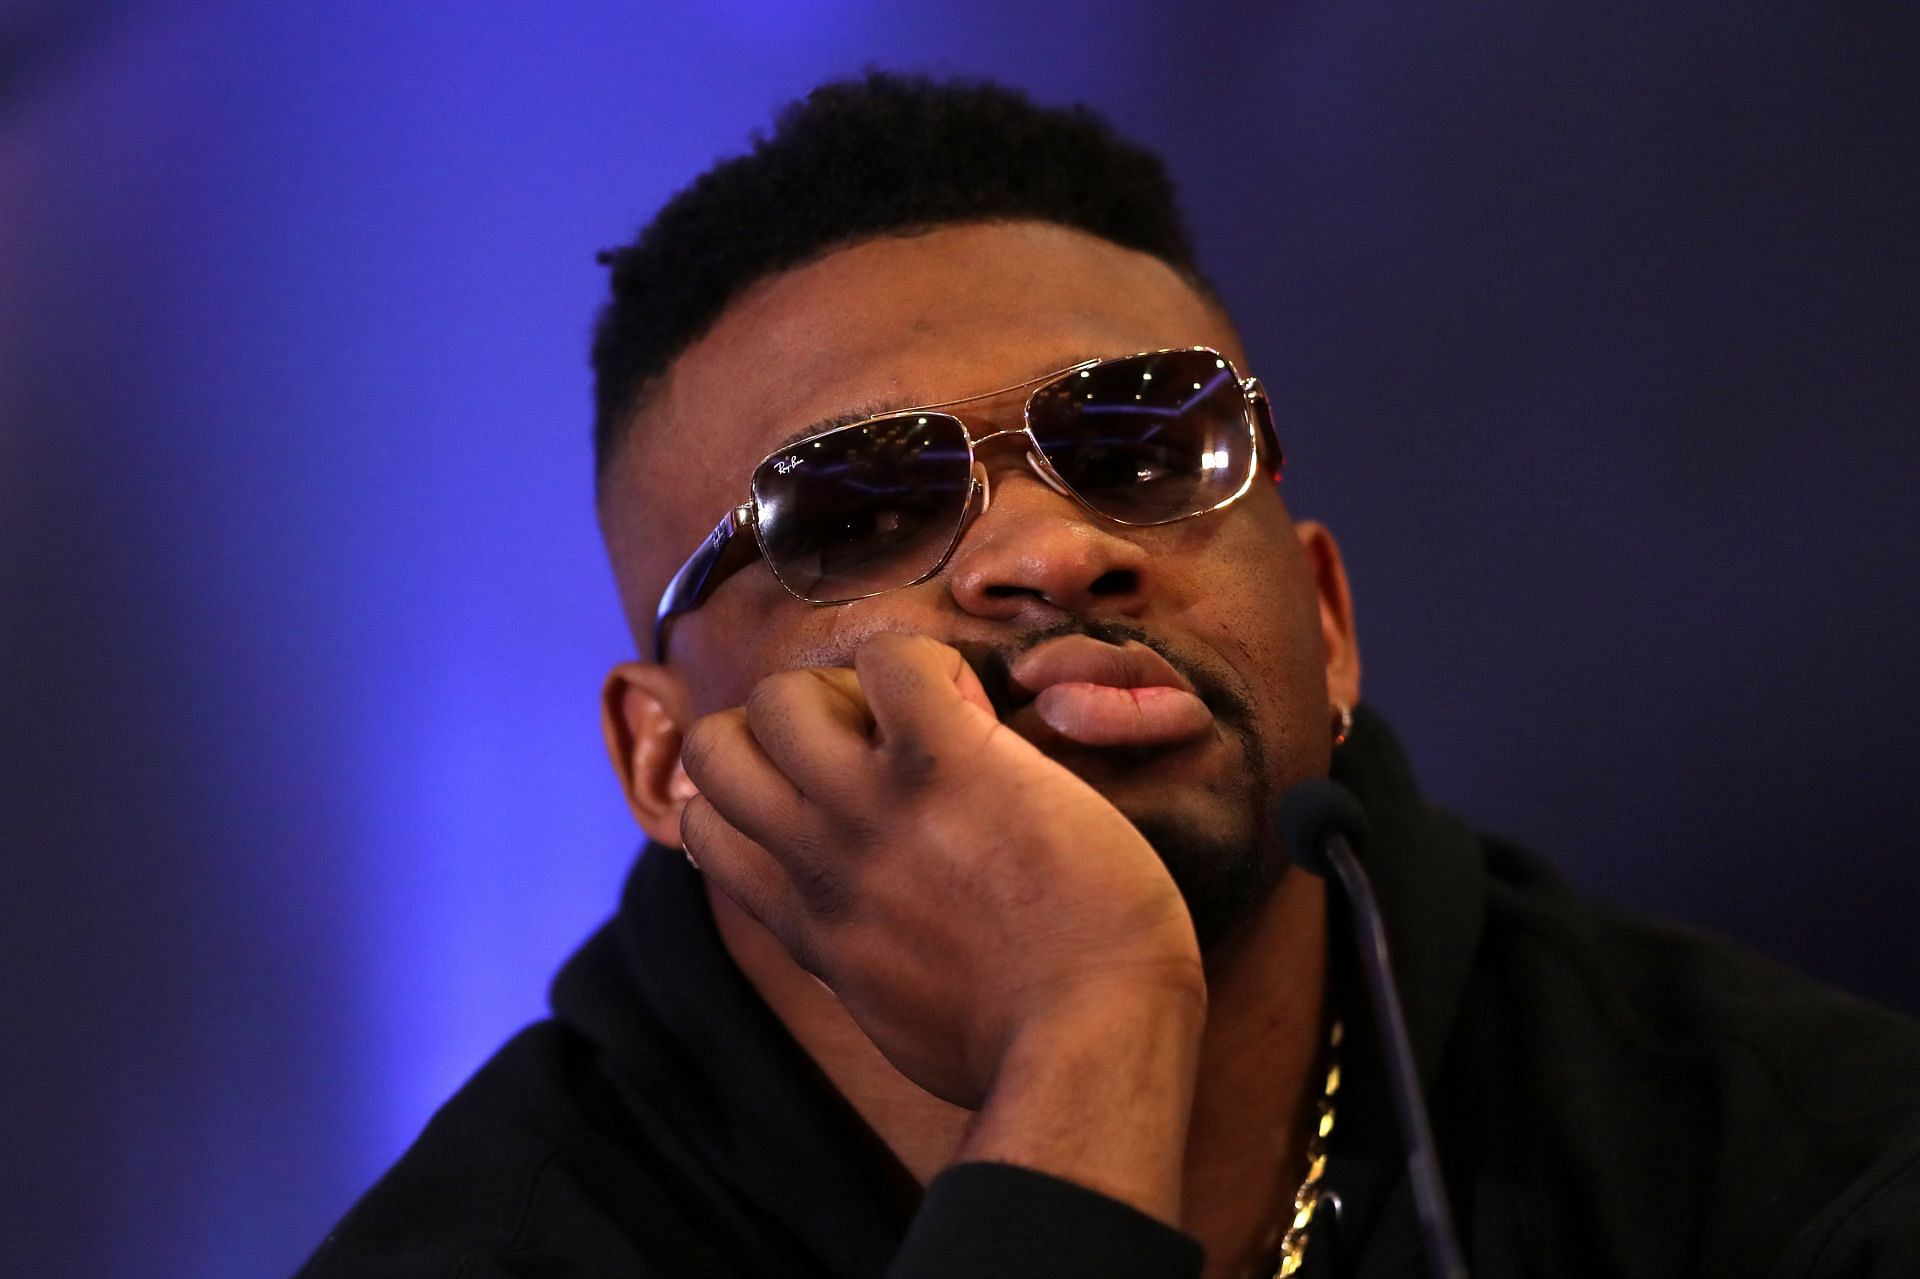 Jarrell Miller is nearing a return to the ring, but has some work to do first.